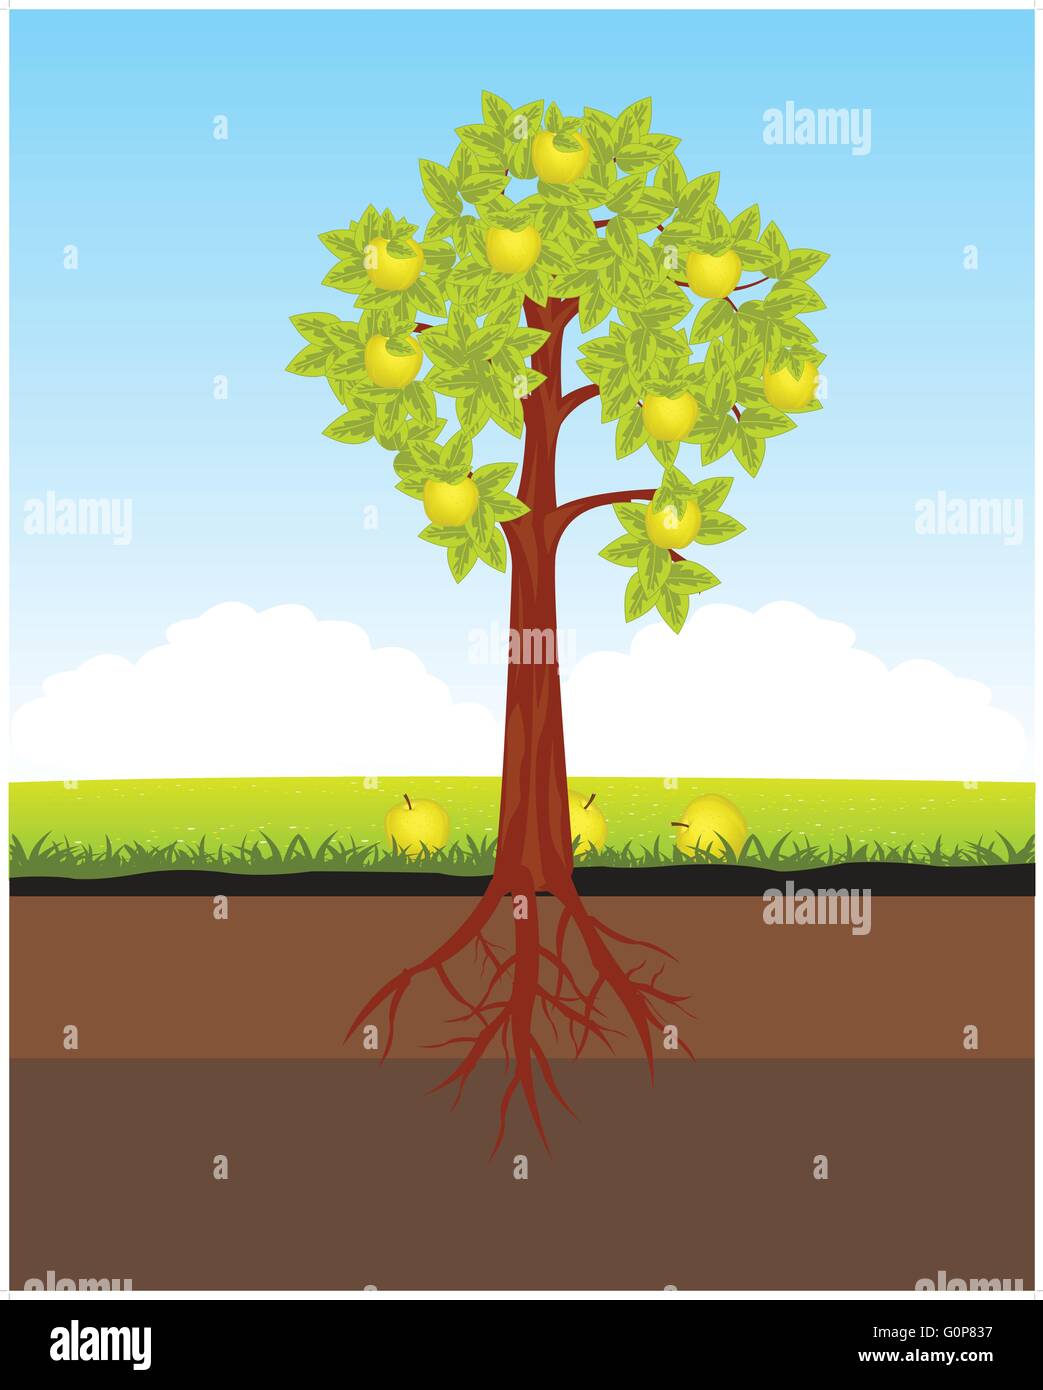 Tree Root Illustration High Resolution Stock Photography and Images - Alamy